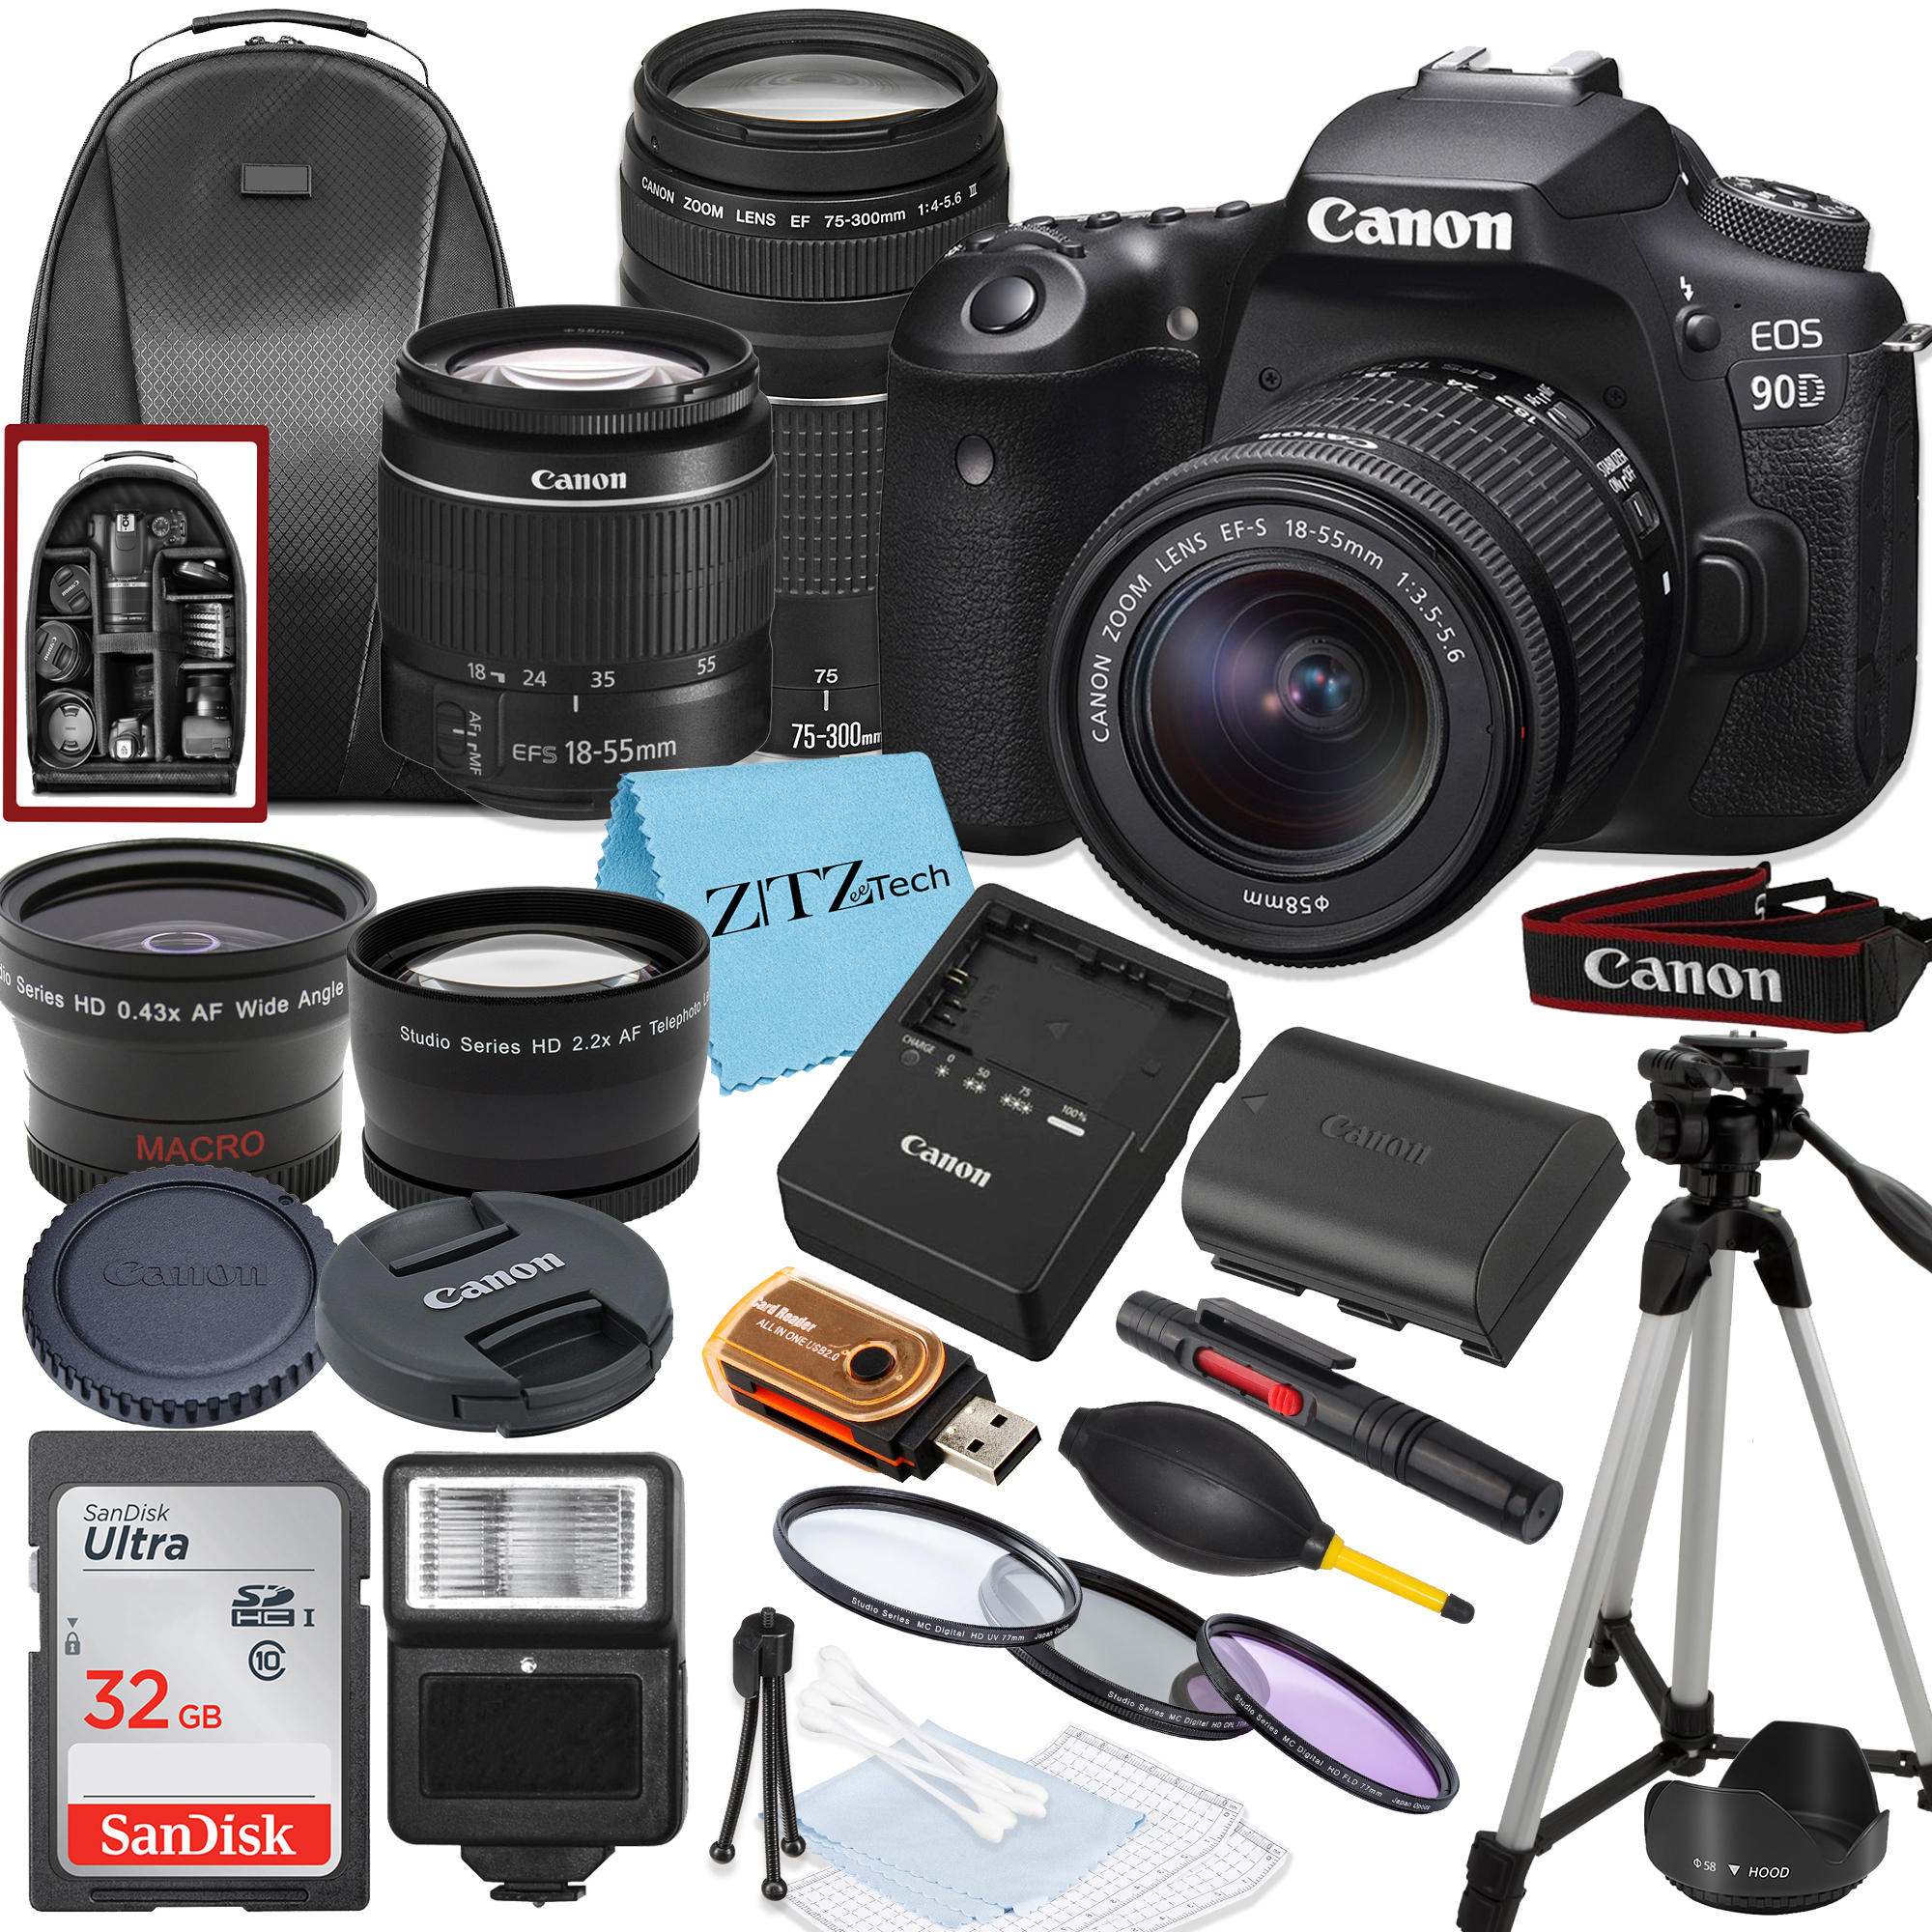 Canon EOS 90D DSLR Camera with 18-55mm, 75-300mm Lens, SanDisk 32GB Card, Backpack, Flash, Tripod and ZeeTech Accessory Bundle